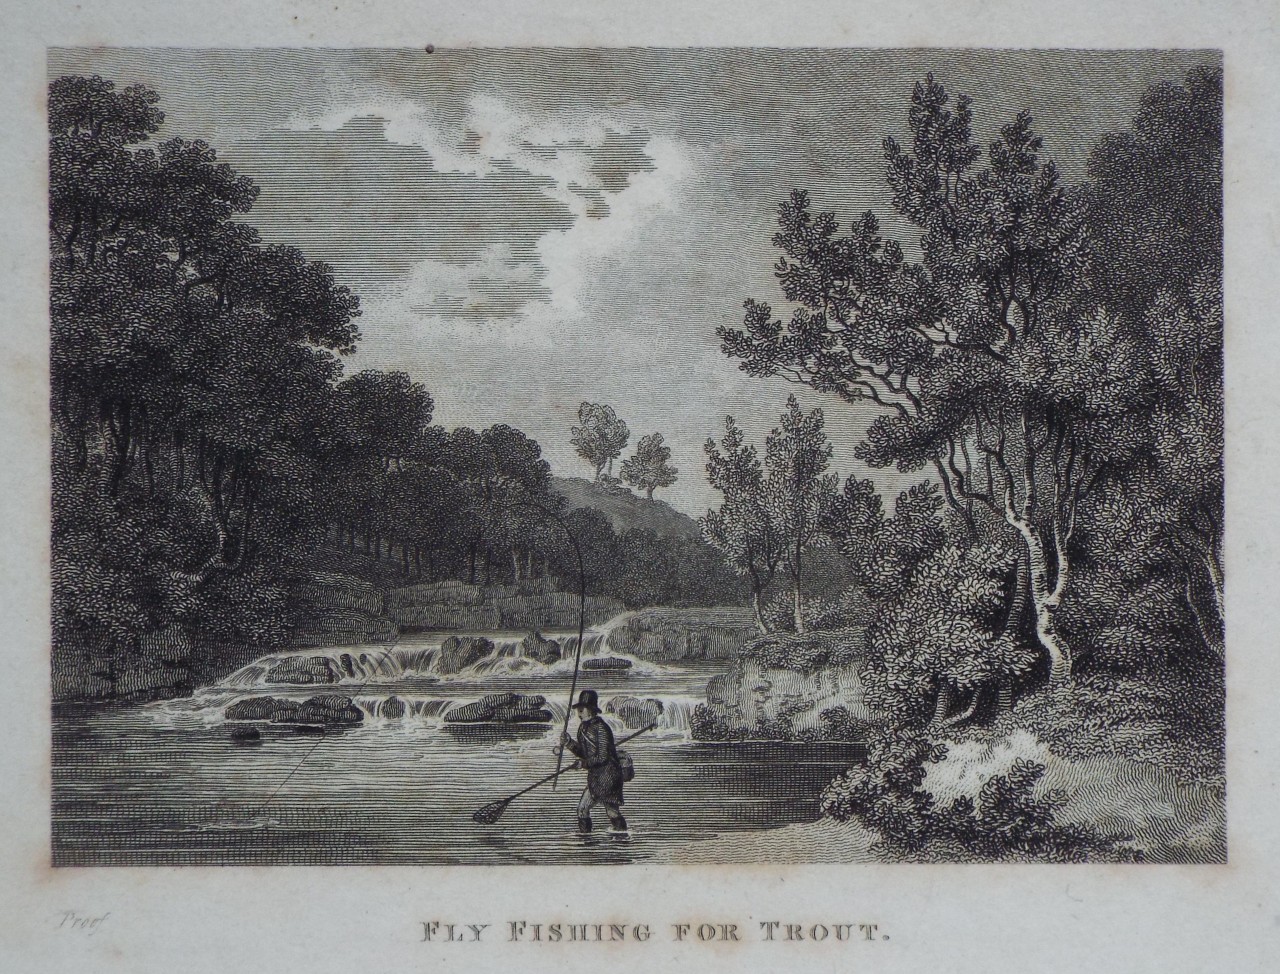 Print - Fly Fishing for Trout.